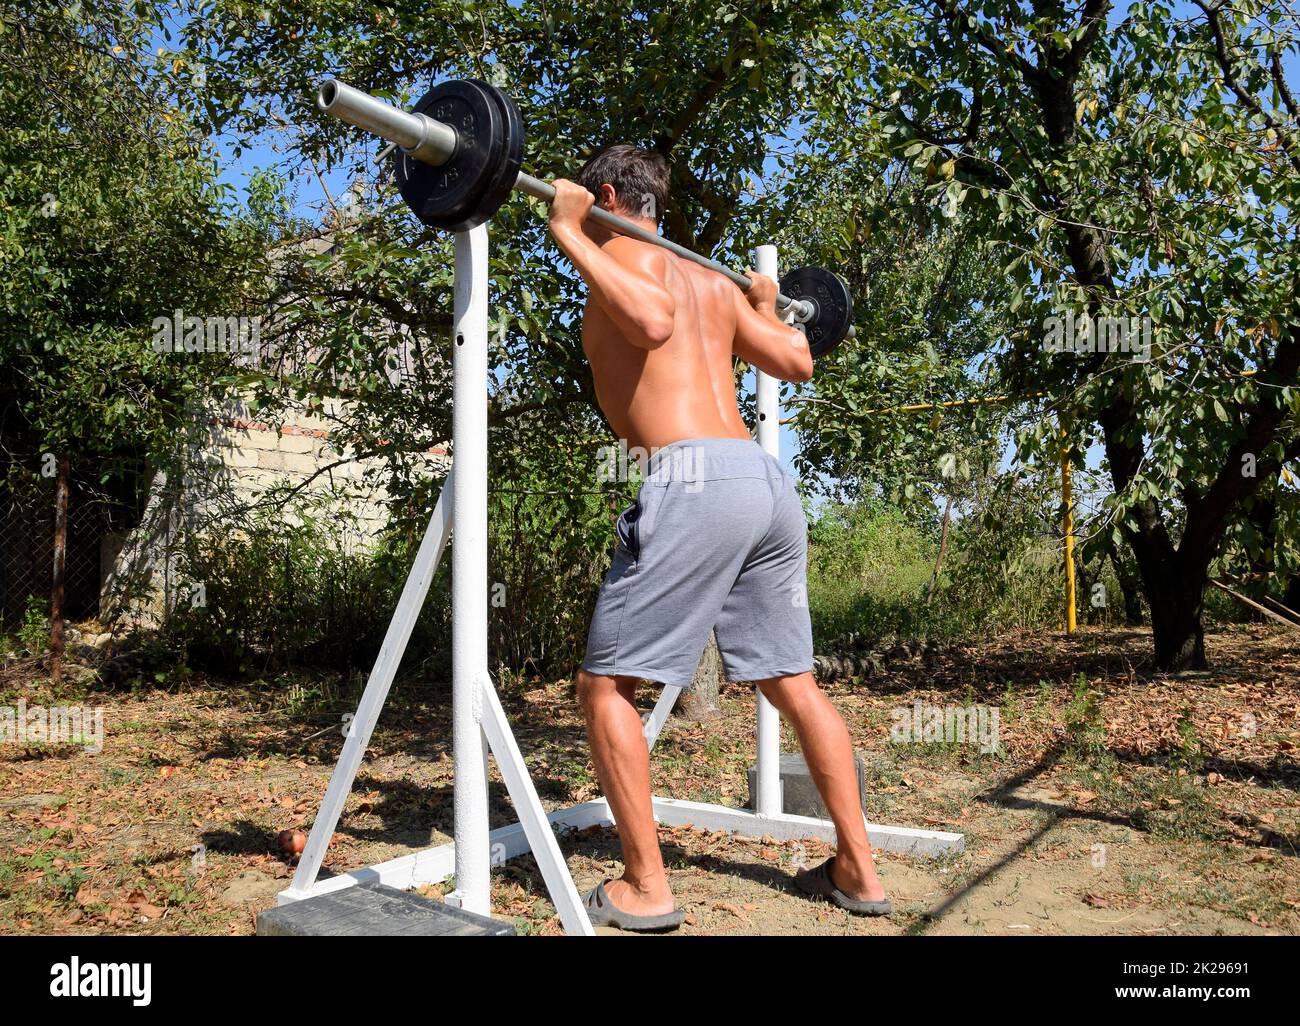 man takes a bar to perform squats. Exercises in bodybuilding. sport in the backyard. Stock Photo